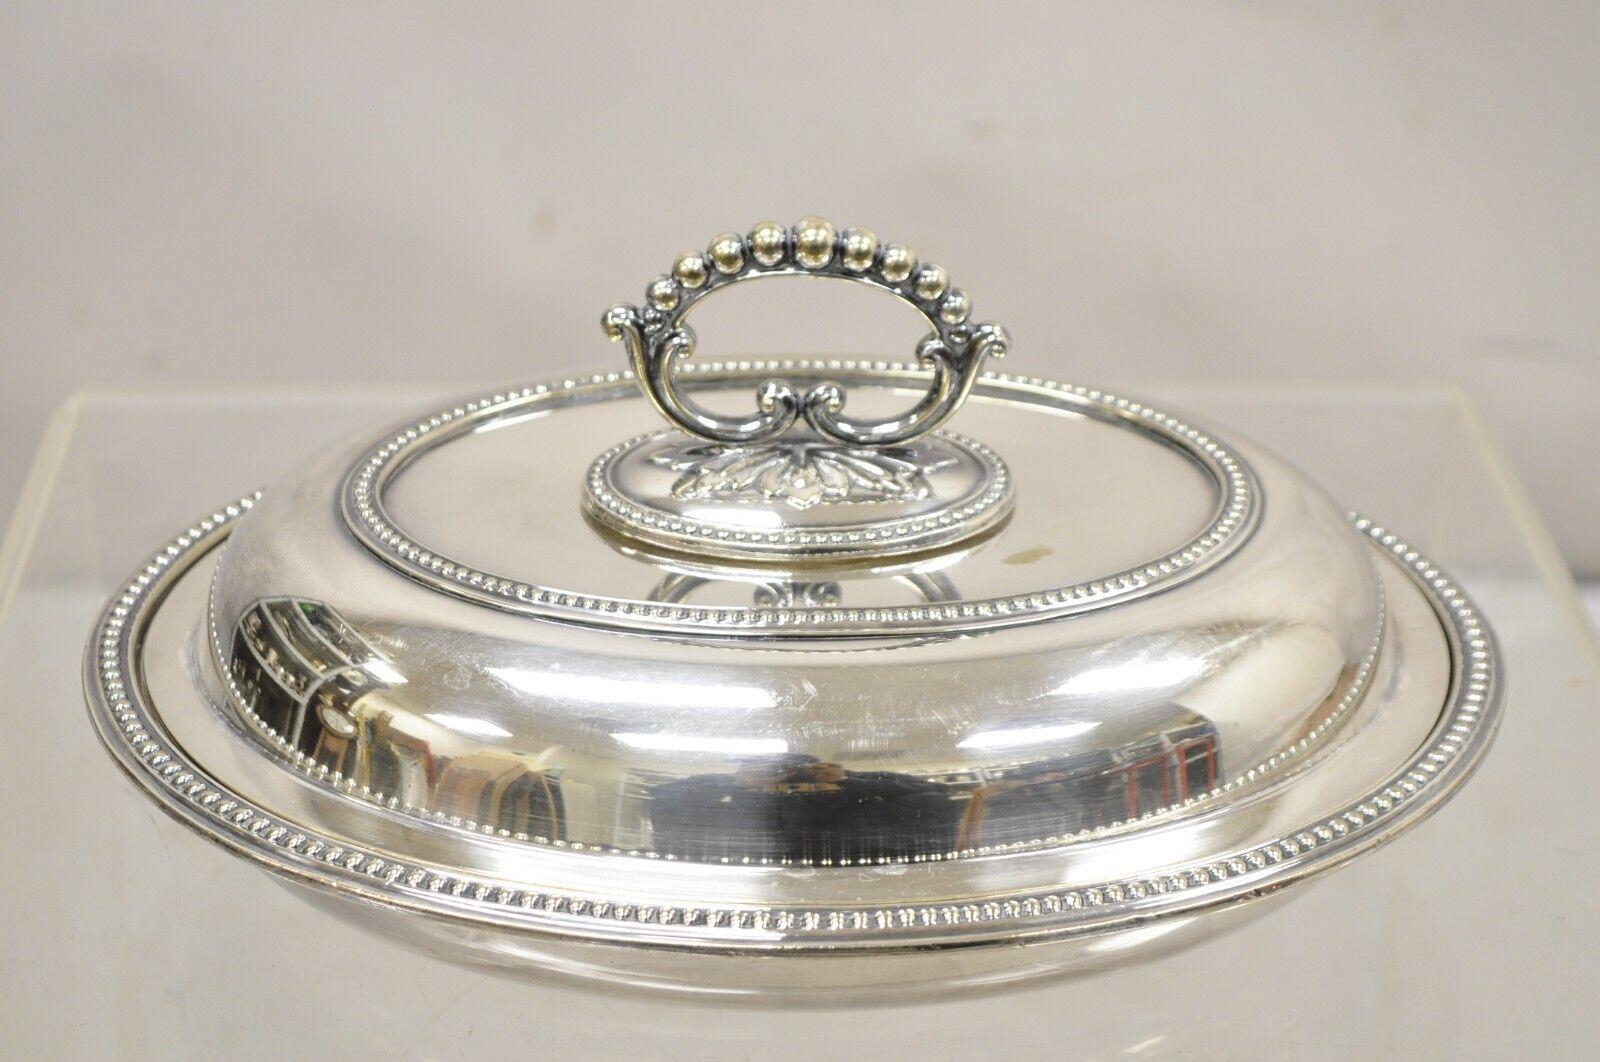 Mappin & Webb's Prince's Plate English Sheffield Silver Plated Covered Dish (Plat couvert en argent) en vente 4